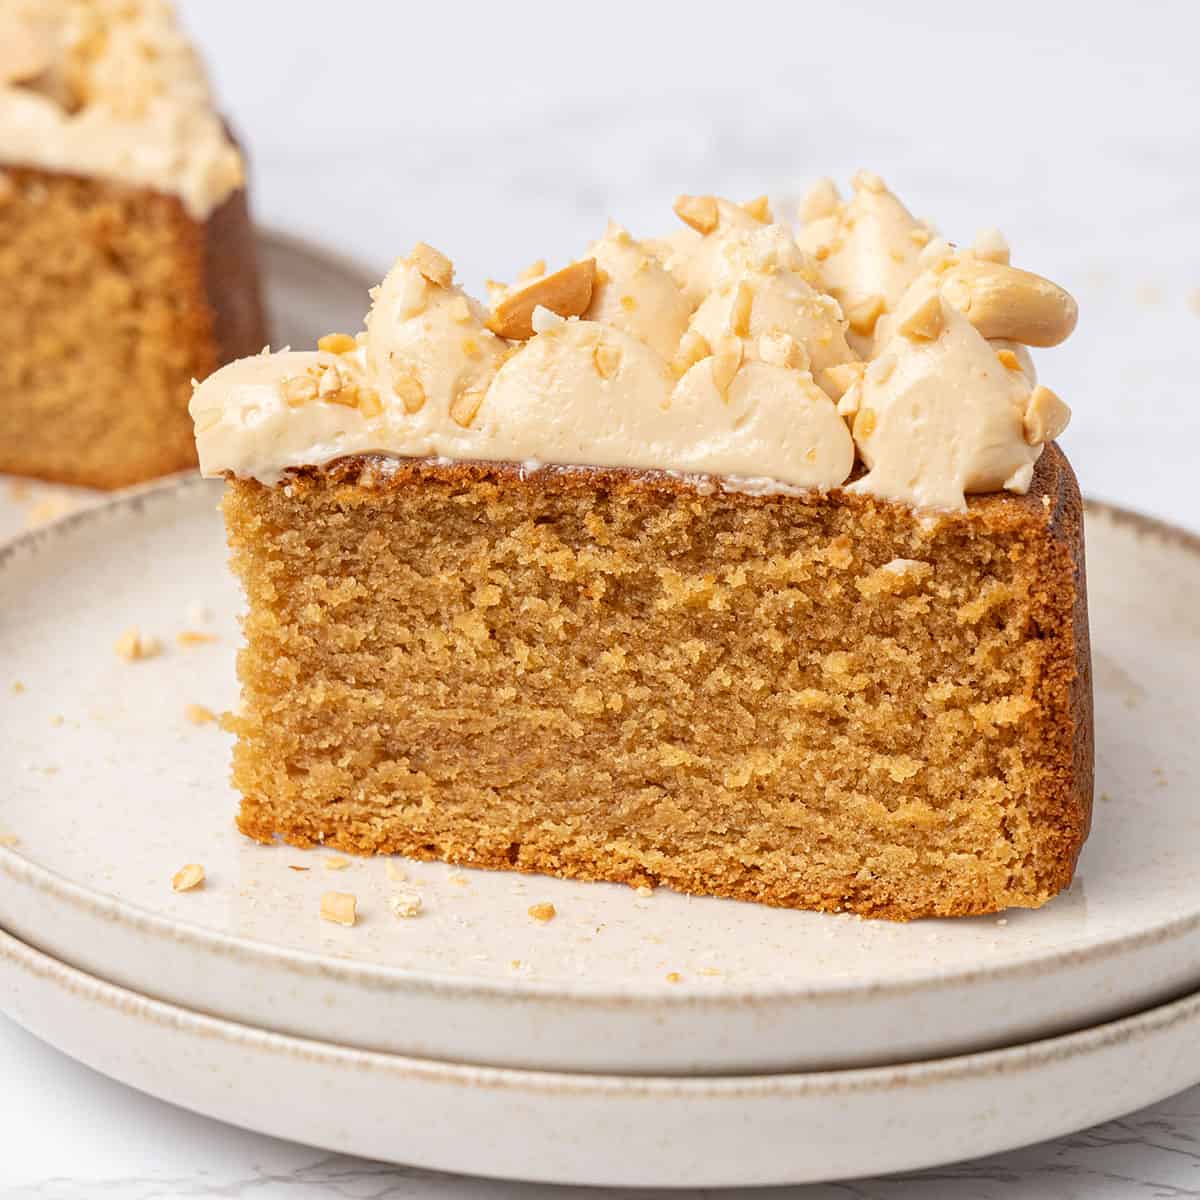 <p>If you have been searching for the ultimate<a href="https://www.spatuladesserts.com/peanut-butter-cake/"> <strong>peanut butter cake</strong> </a>recipe that will be the talk of the town, look no further! This showstopper peanut butter cake is made with moist, fluffy sponge cakes and is topped with a smooth and creamy peanut butter cream cheese frosting. Equally old-fashioned and modern, this peanut butter cake is perfect for a special occasion or a casual afternoon snack. Who knew that putting peanut butter in cake could be so good?</p><p><strong>Go to the recipe: <a href="https://www.spatuladesserts.com/peanut-butter-cake/">Peanut Butter Cake</a></strong></p>